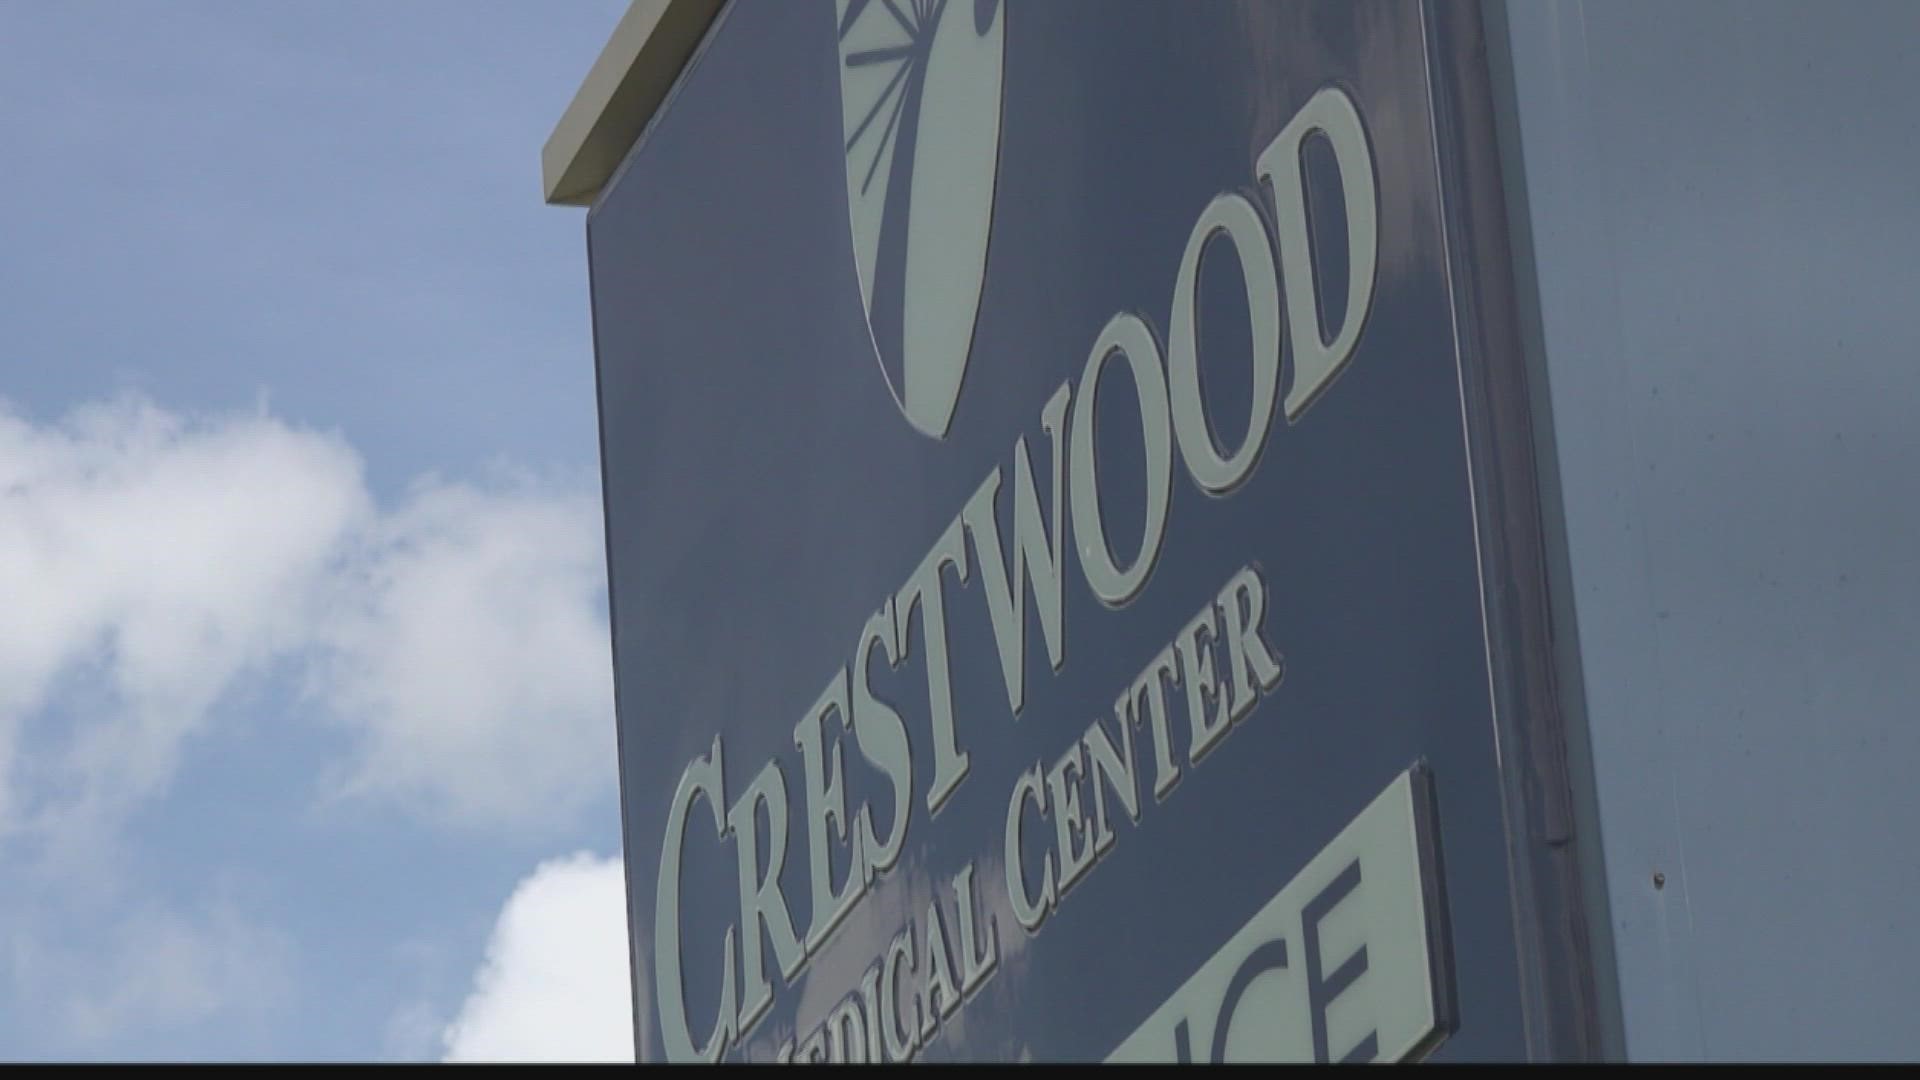 The CEO of Crestwood Medical Center, Dr. Pam Hudson, says that the biggest issue they are facing right now is a shortage of bedside nurses to care for sick patients.